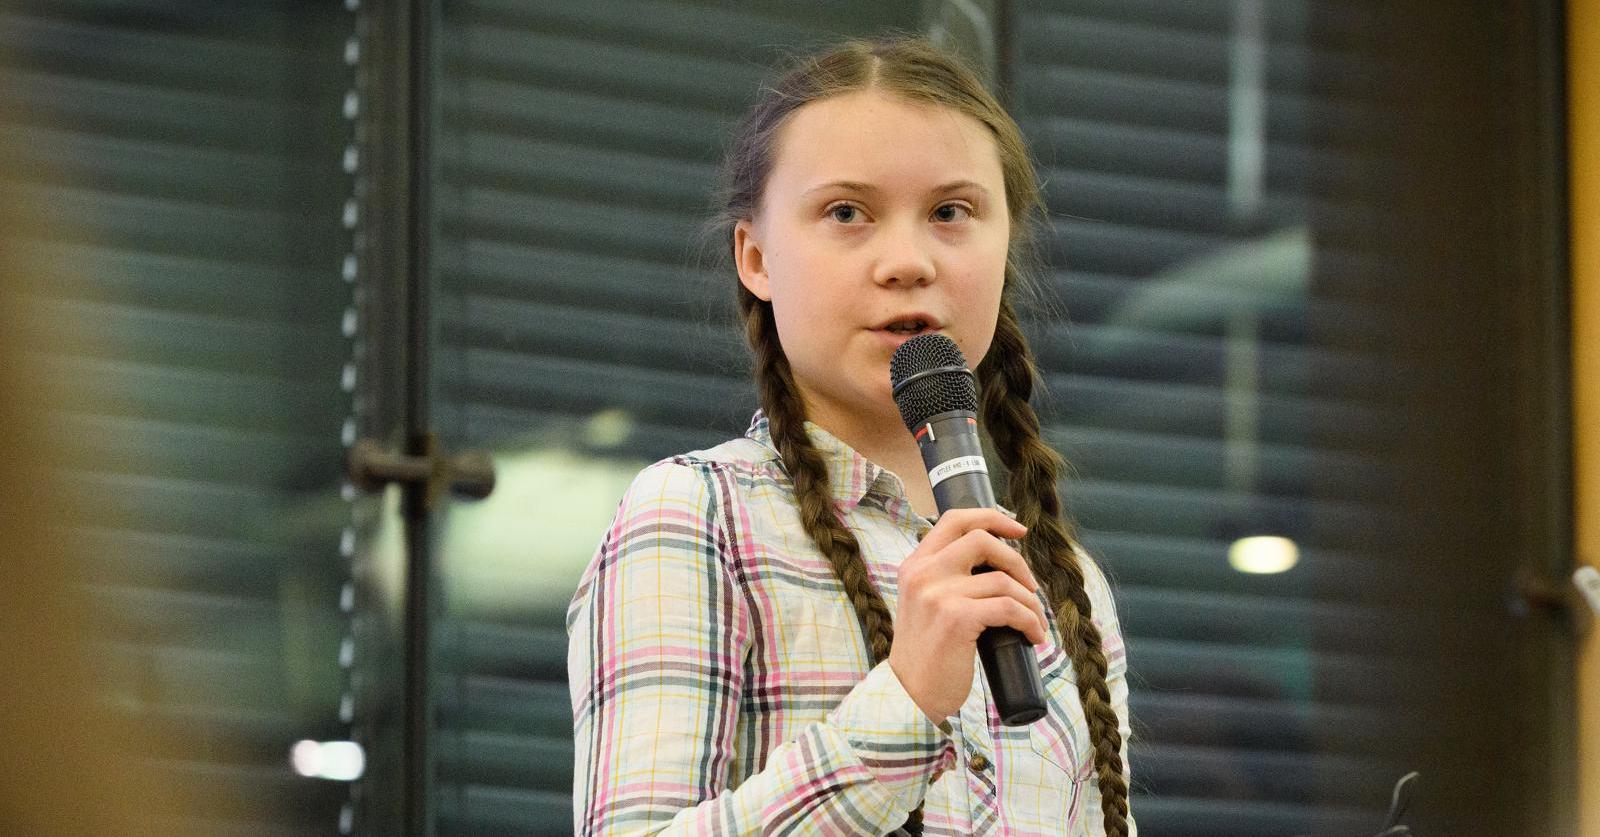 9 Quotes From Greta Thunberg's Speech to Parliament: 